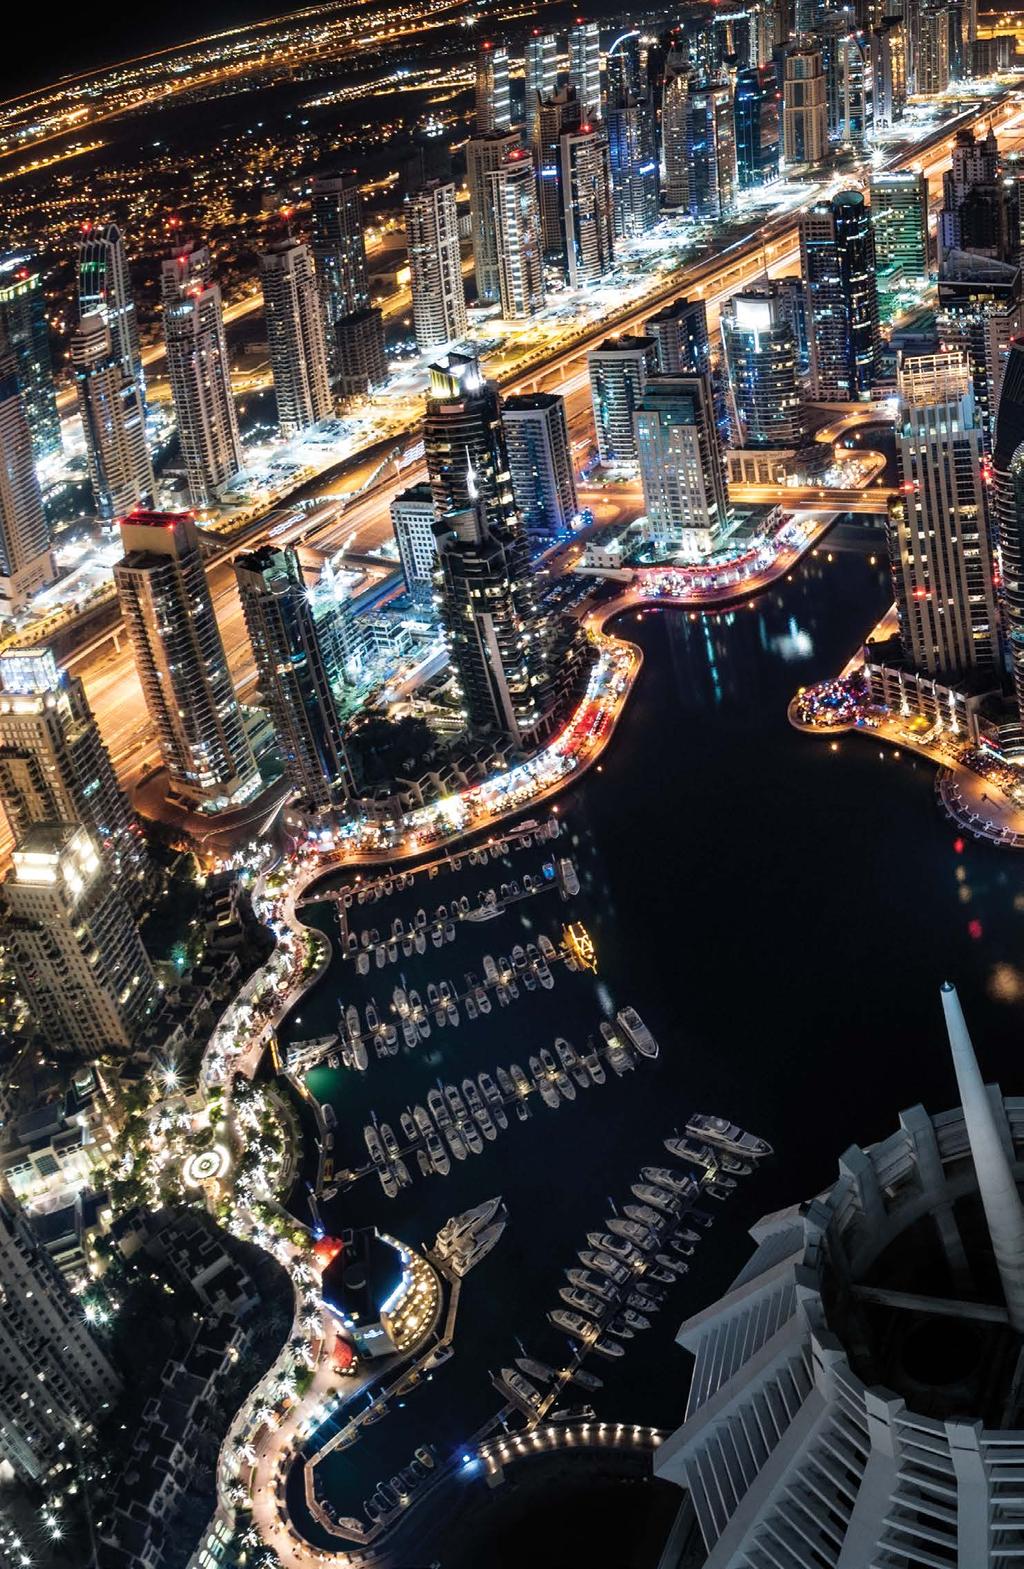 Dubai is a melting pot of the old and the new: from the history, culture and traditions of the Arab world to sky-breaking business towers, bustling mega malls and high-tech transport infrastructure.